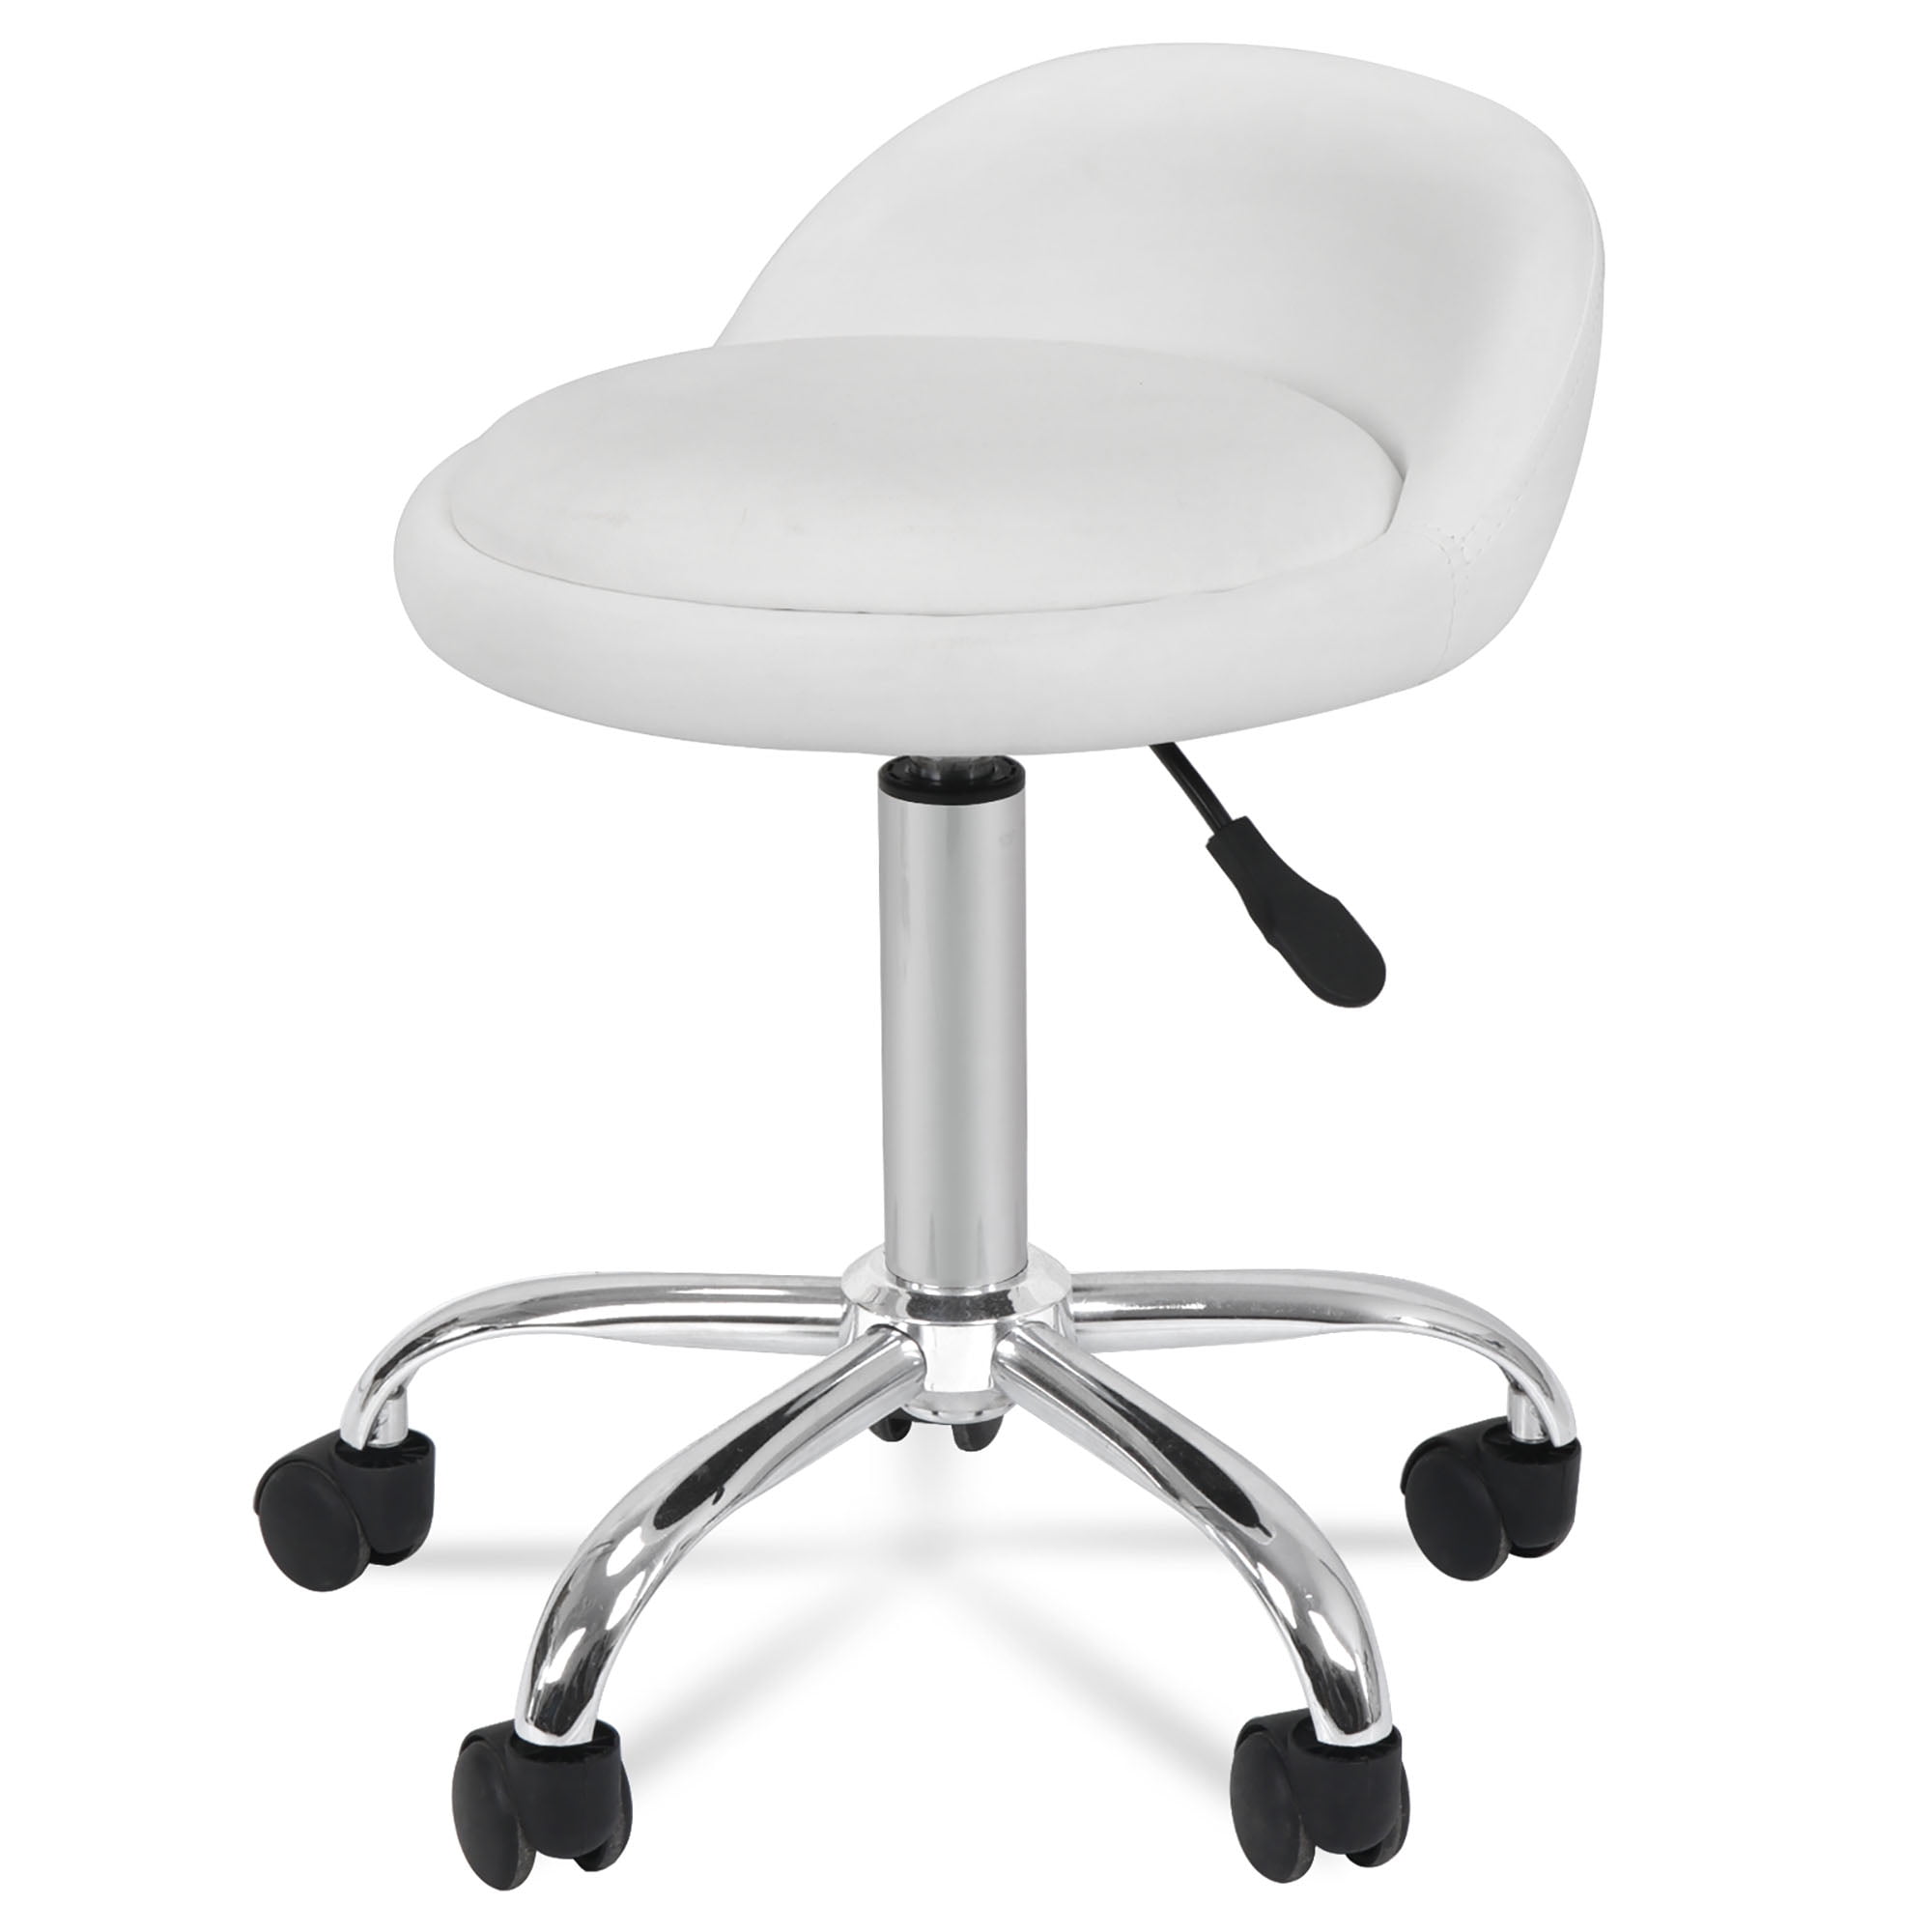 MAMaiuh Rolling Swivel Salon Stools Adjustable Leather OfficeChair Drafting Workbench Task Stool for Shop Spa Kitchen Medical Pedicure